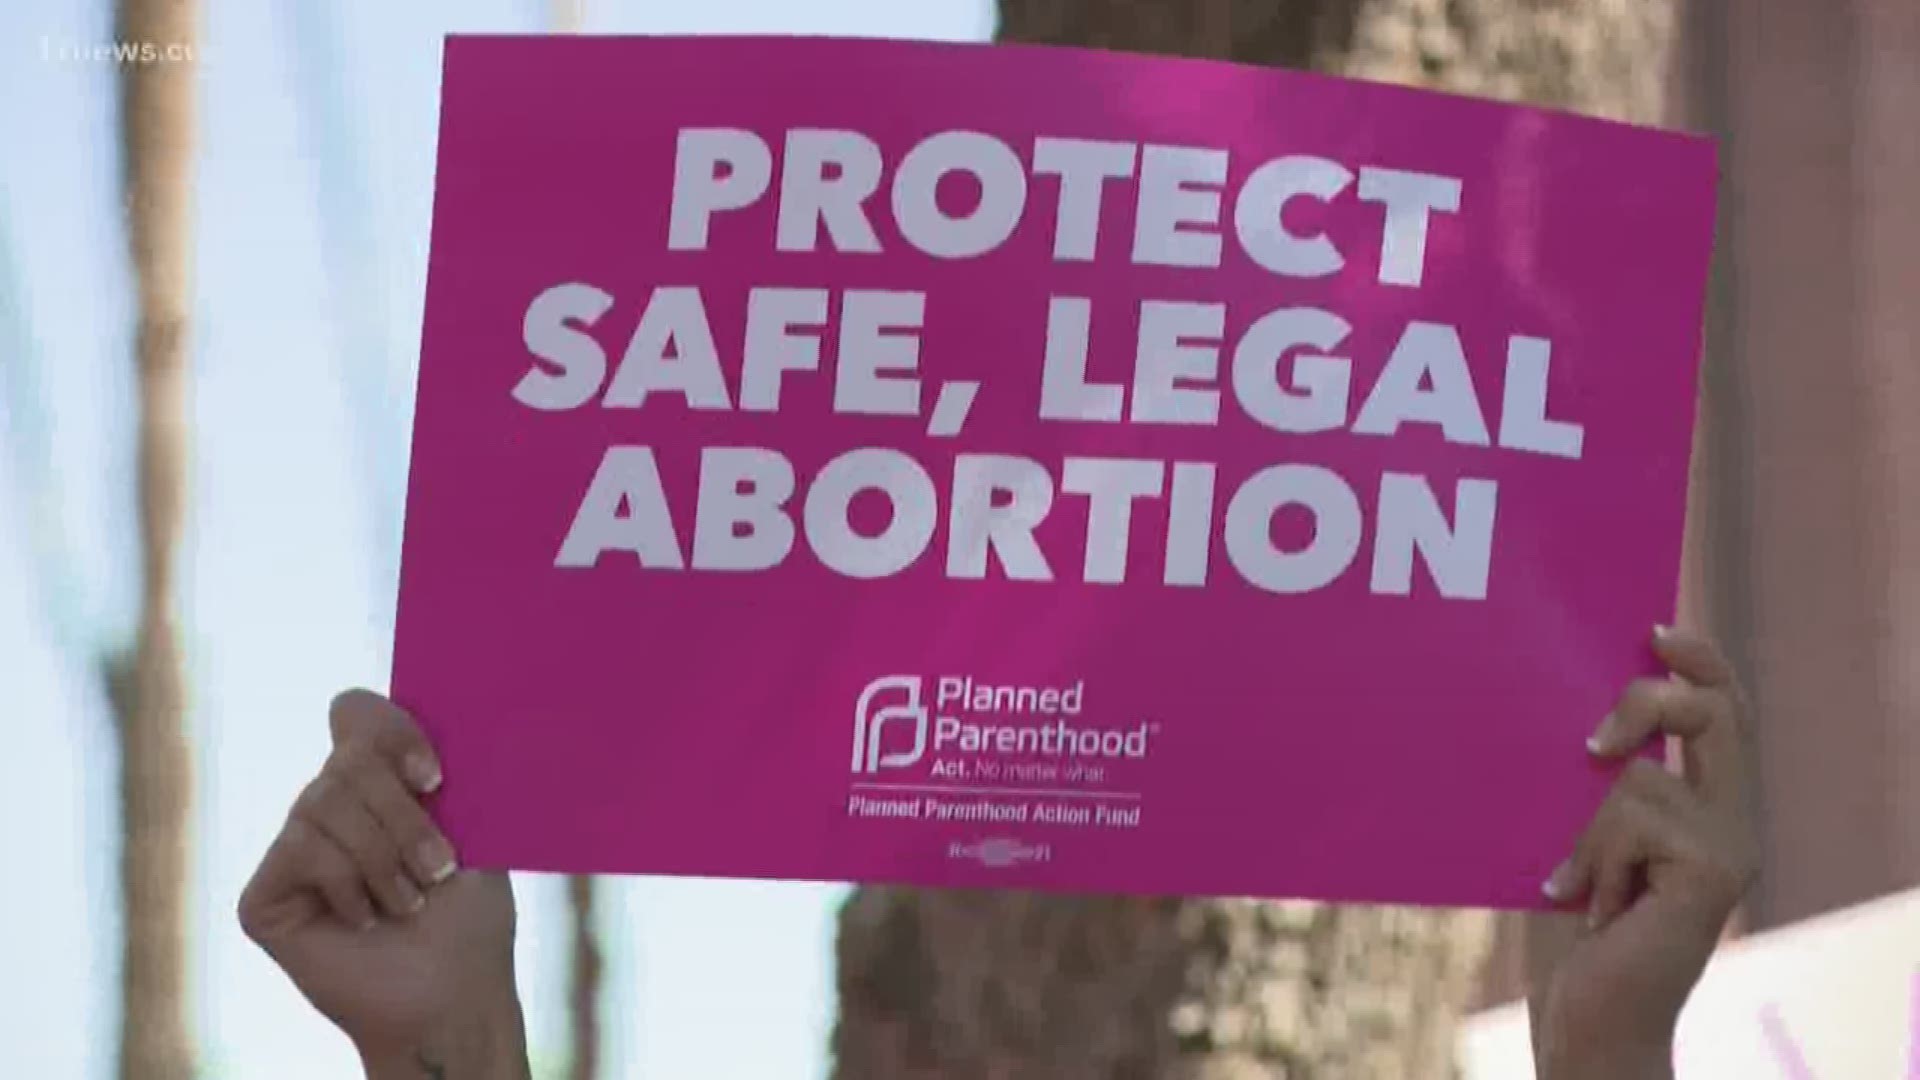 Arizona advocates, especially those at Planned Parenthood, say the abortion case in front of the Supreme Court poses physical danger to Arizona women.